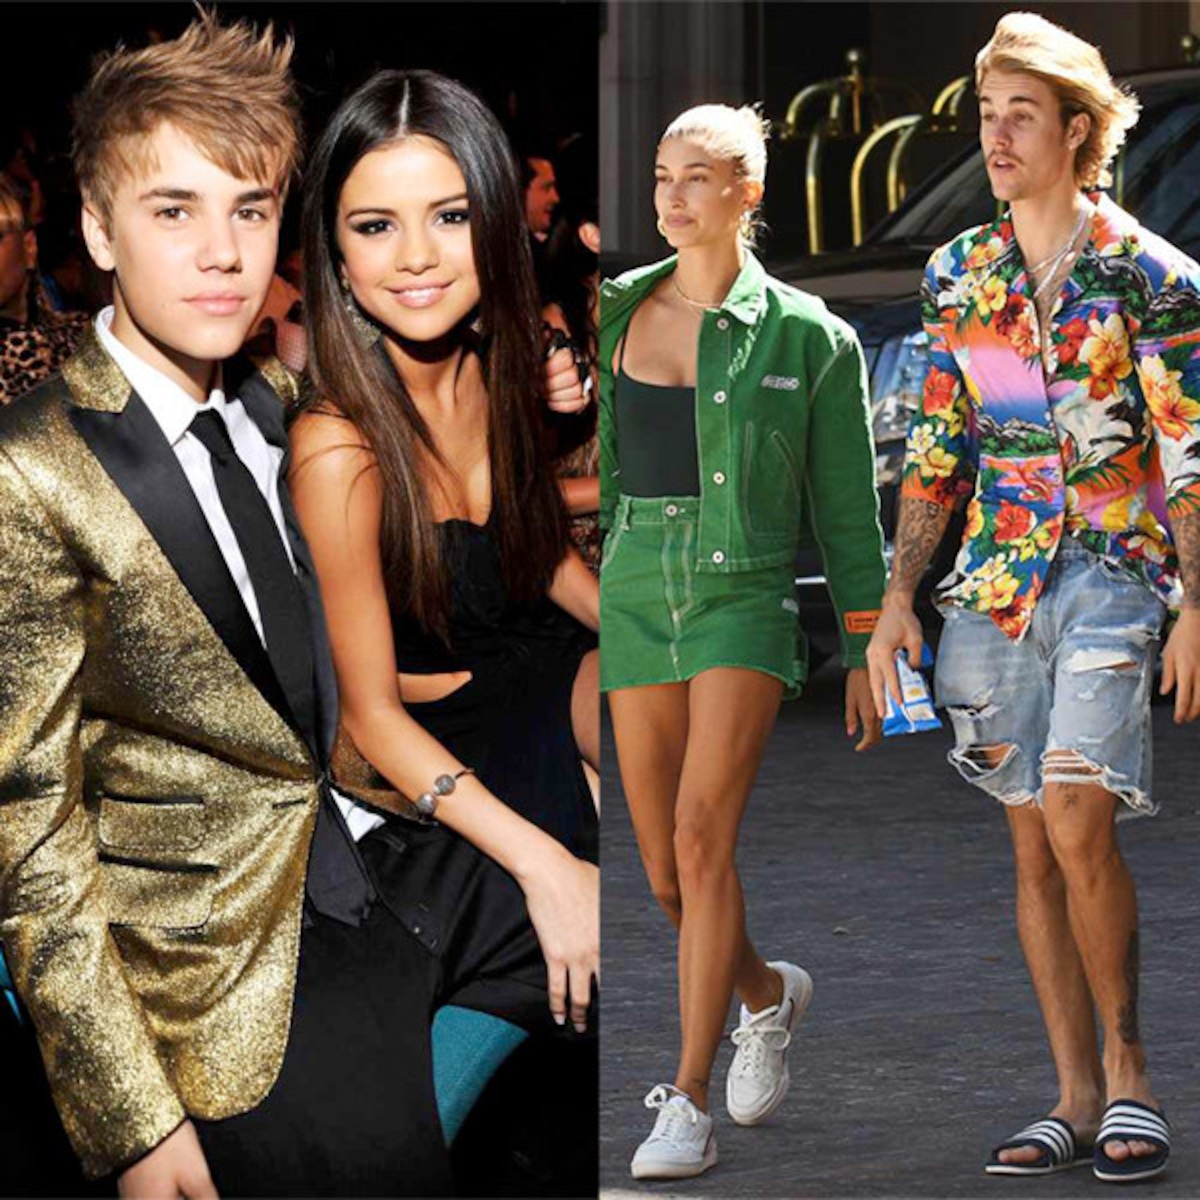 Justin Biebers Style Does A 180 And We Have His Girlfriends